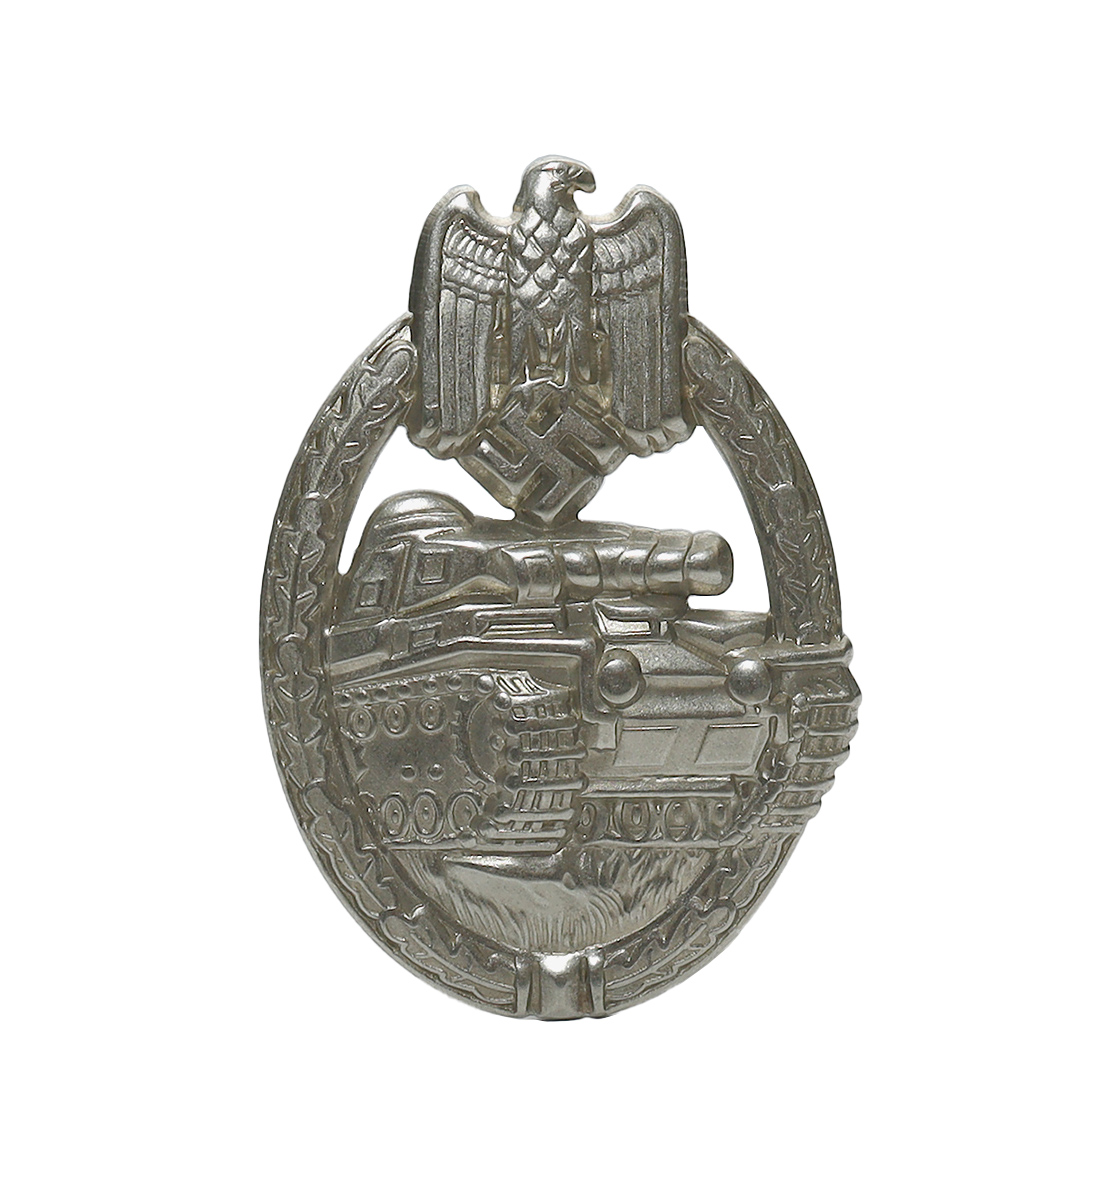 PANZER ASSAULT BADGE IN SILVER HOLLOW BACK  (NICKEL SILVER)  